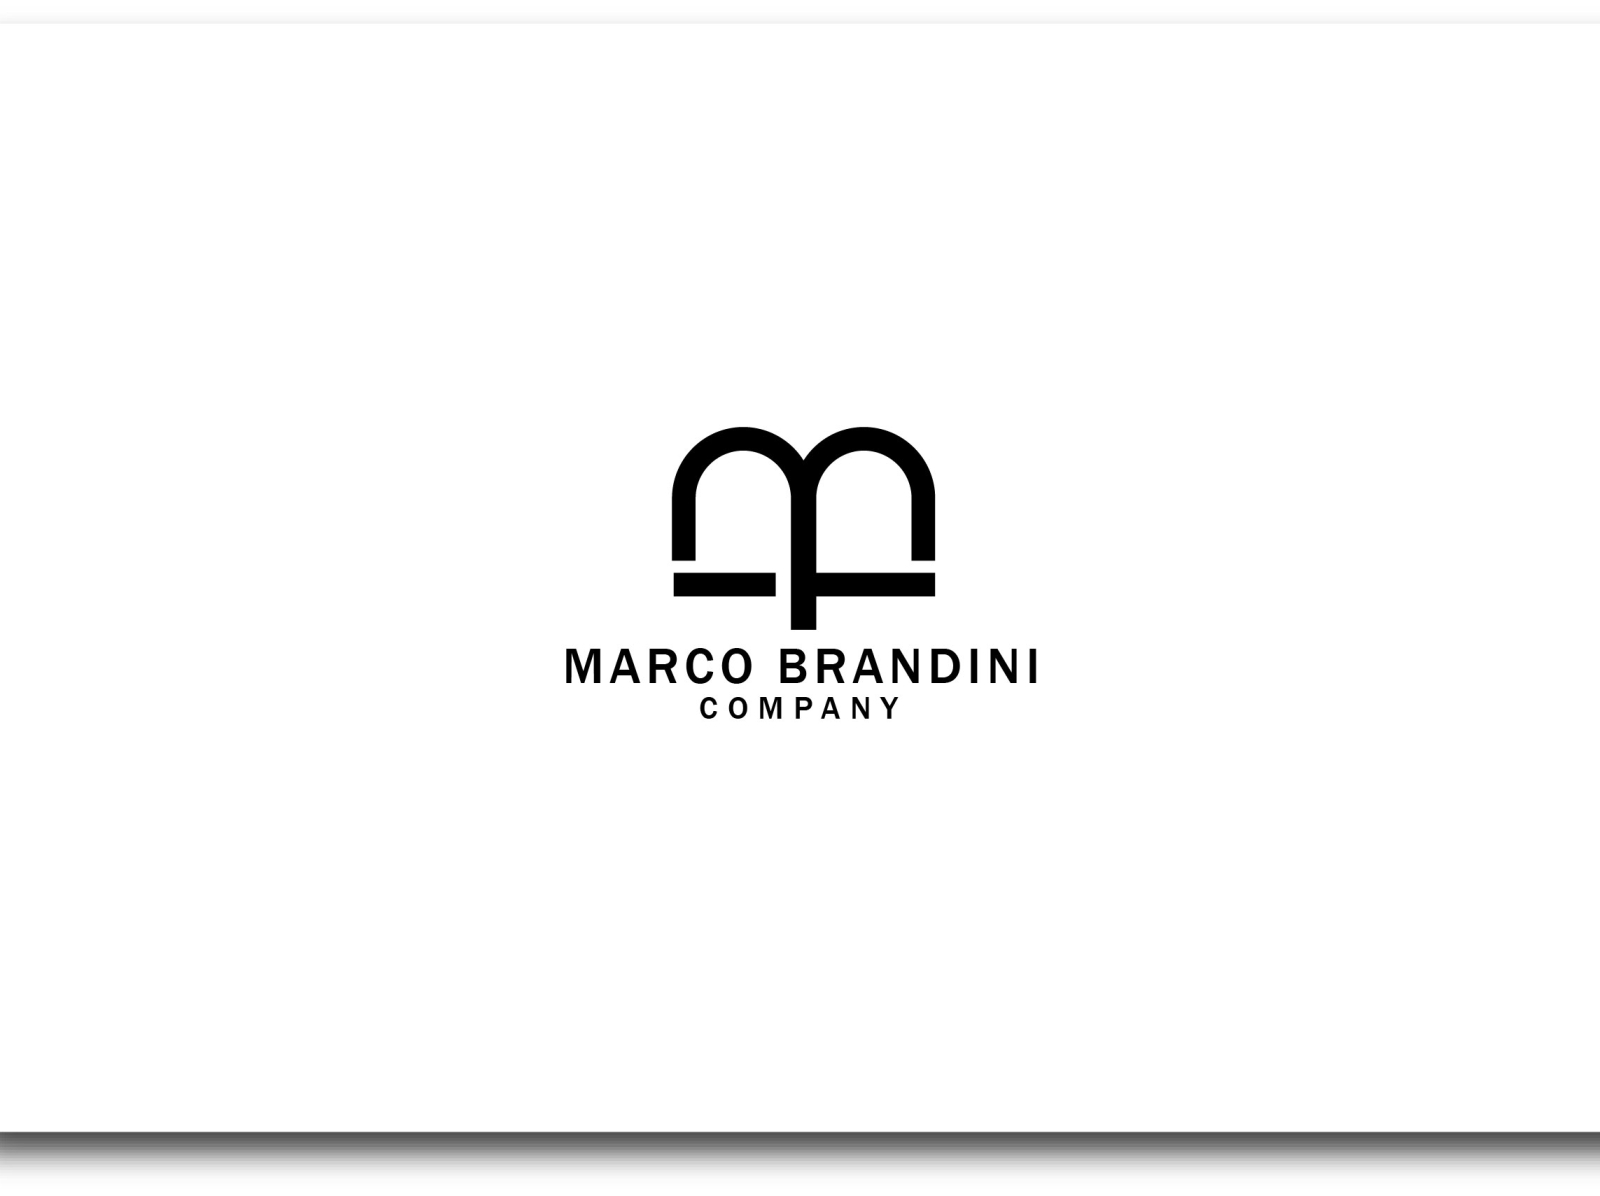 Minimalist business logo design by xcoolee on Dribbble